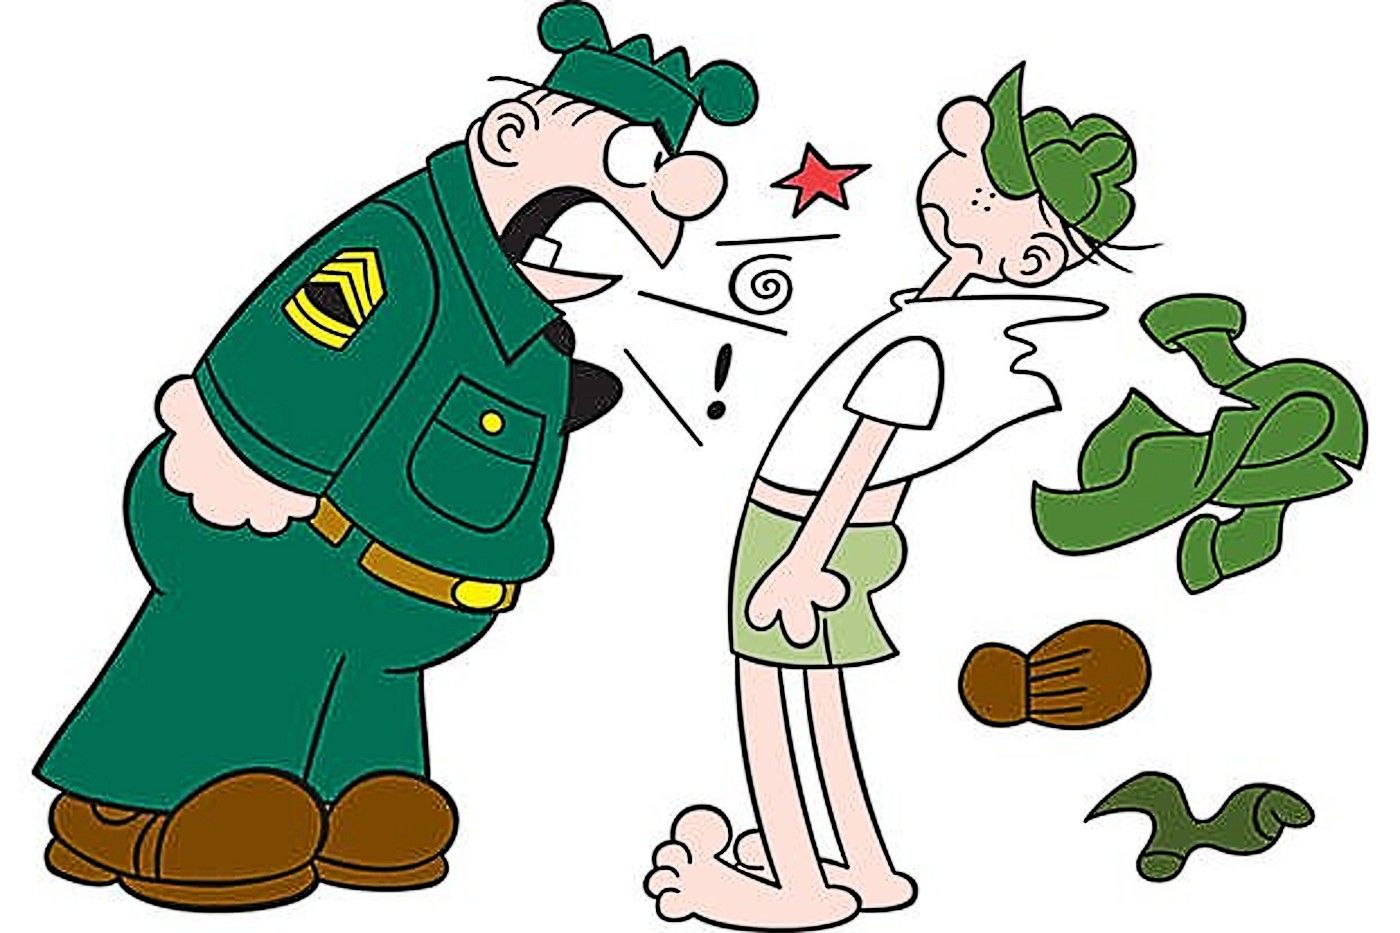 Beetle Bailey getting yelled at by Sarge, whose shouting blows Beetle's clothes off his body